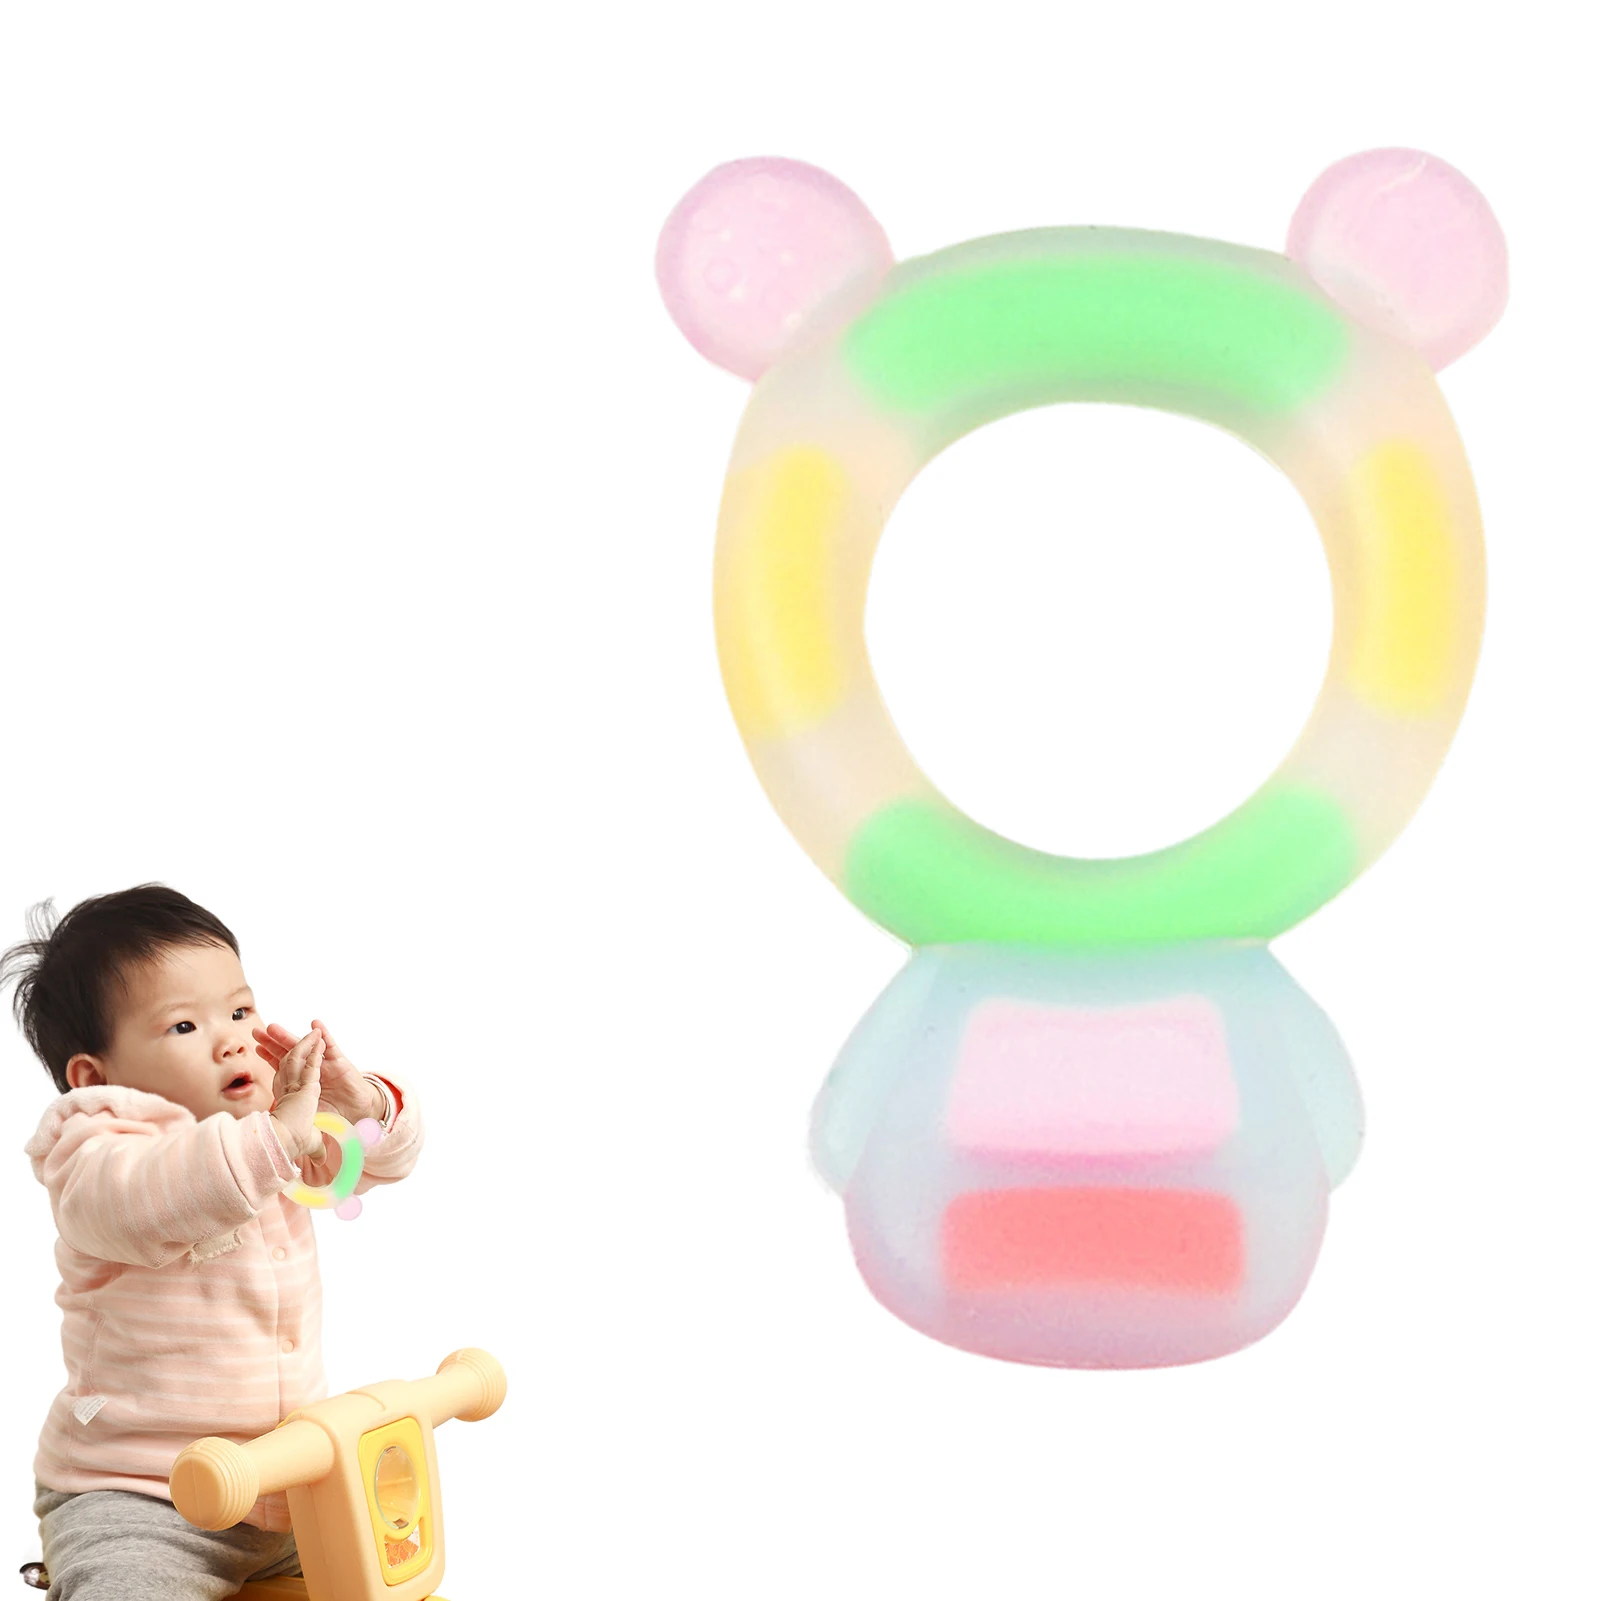 

Bear/Bunny Shape Baby Teether Toy Soft Silicone Infant Teething Toys Soothe Babies Sore Gums Safe Teethers For 3-12 Months